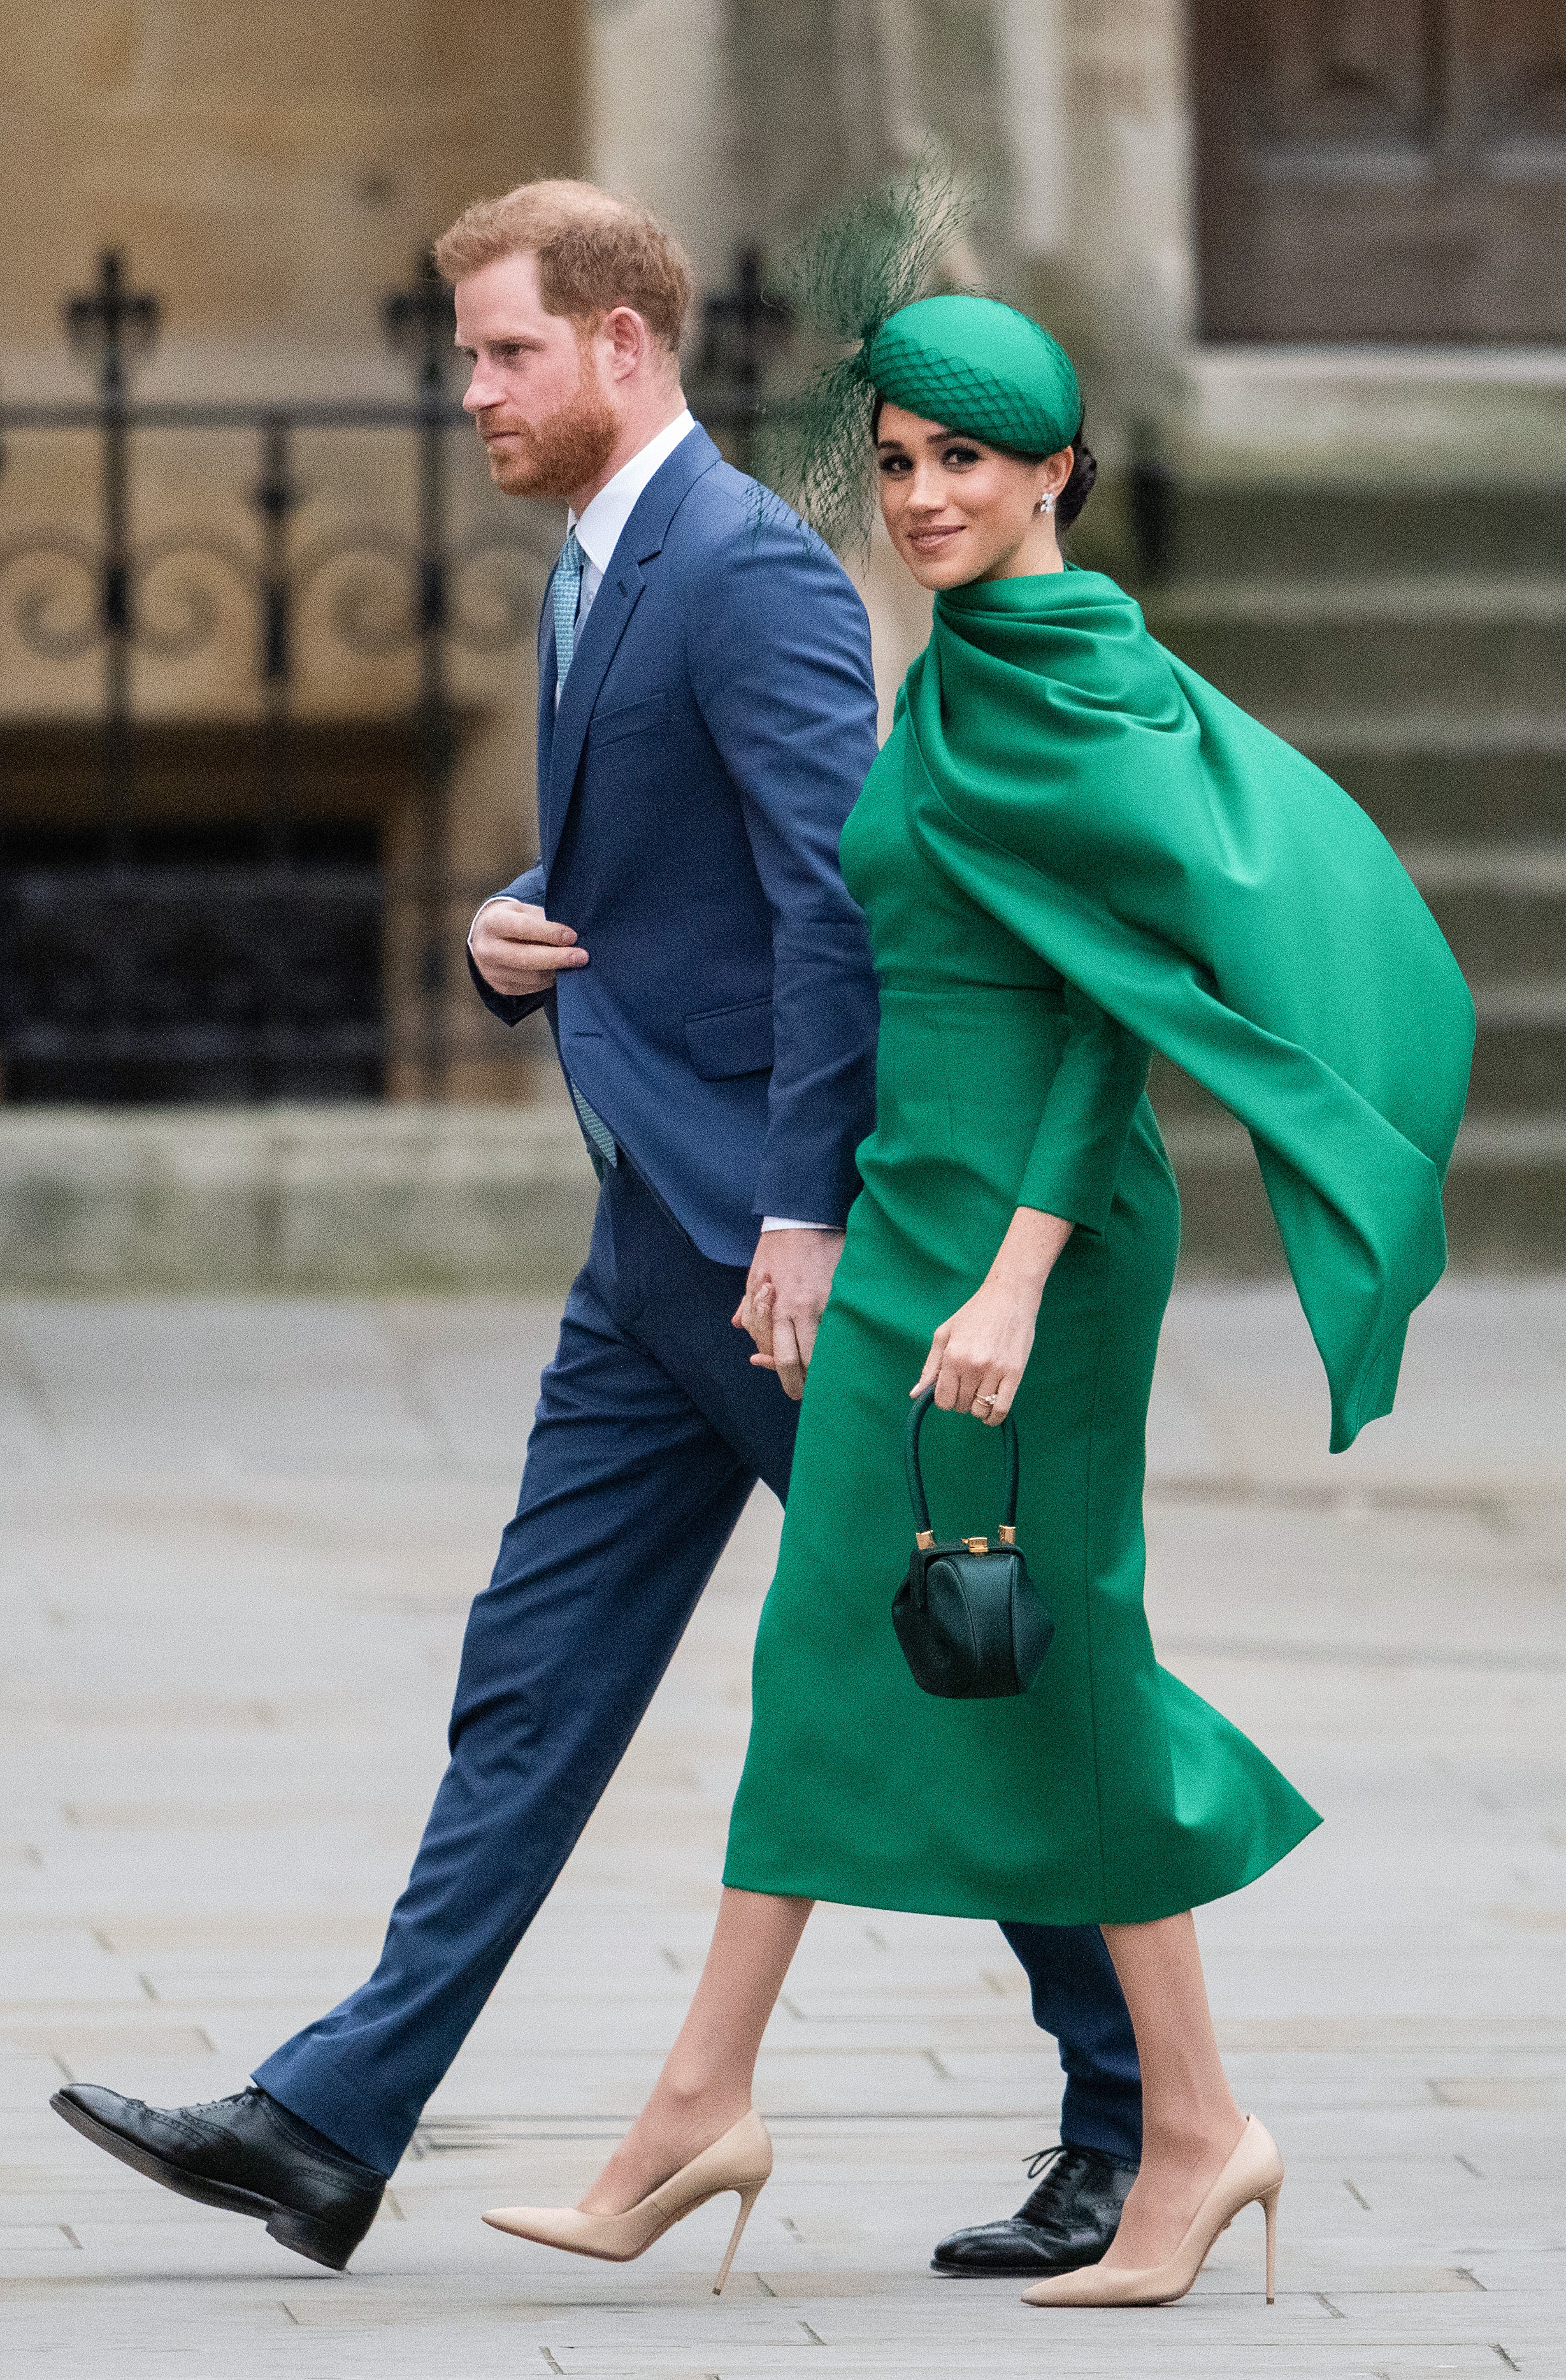 Meghan was a vision in green at the Commonwealth Day Service